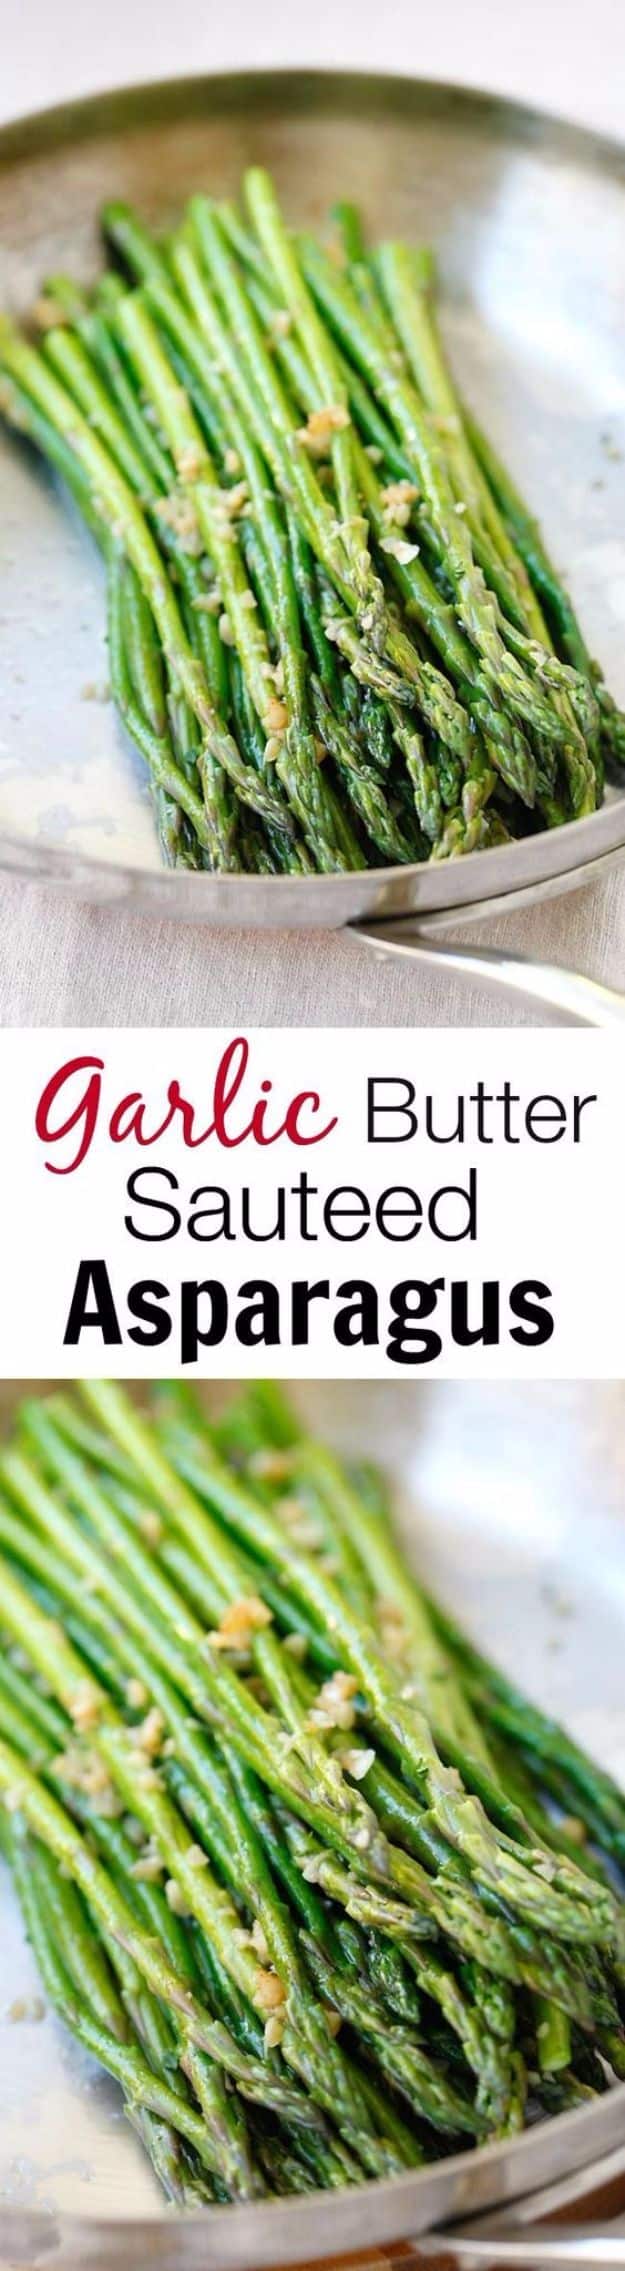 Best Easter Dinner Recipes - Garlic Butter Sauteed Asparagus - Easy Recipe Ideas for Easter Dinners and Holiday Meals for Families - Side Dishes, Slow Cooker Recipe Tutorials, Main Courses, Traditional Meat, Vegetable and Dessert Ideas - Desserts, Pies, Cakes, Ham and Beef, Lamb - DIY Projects and Crafts by DIY JOY 